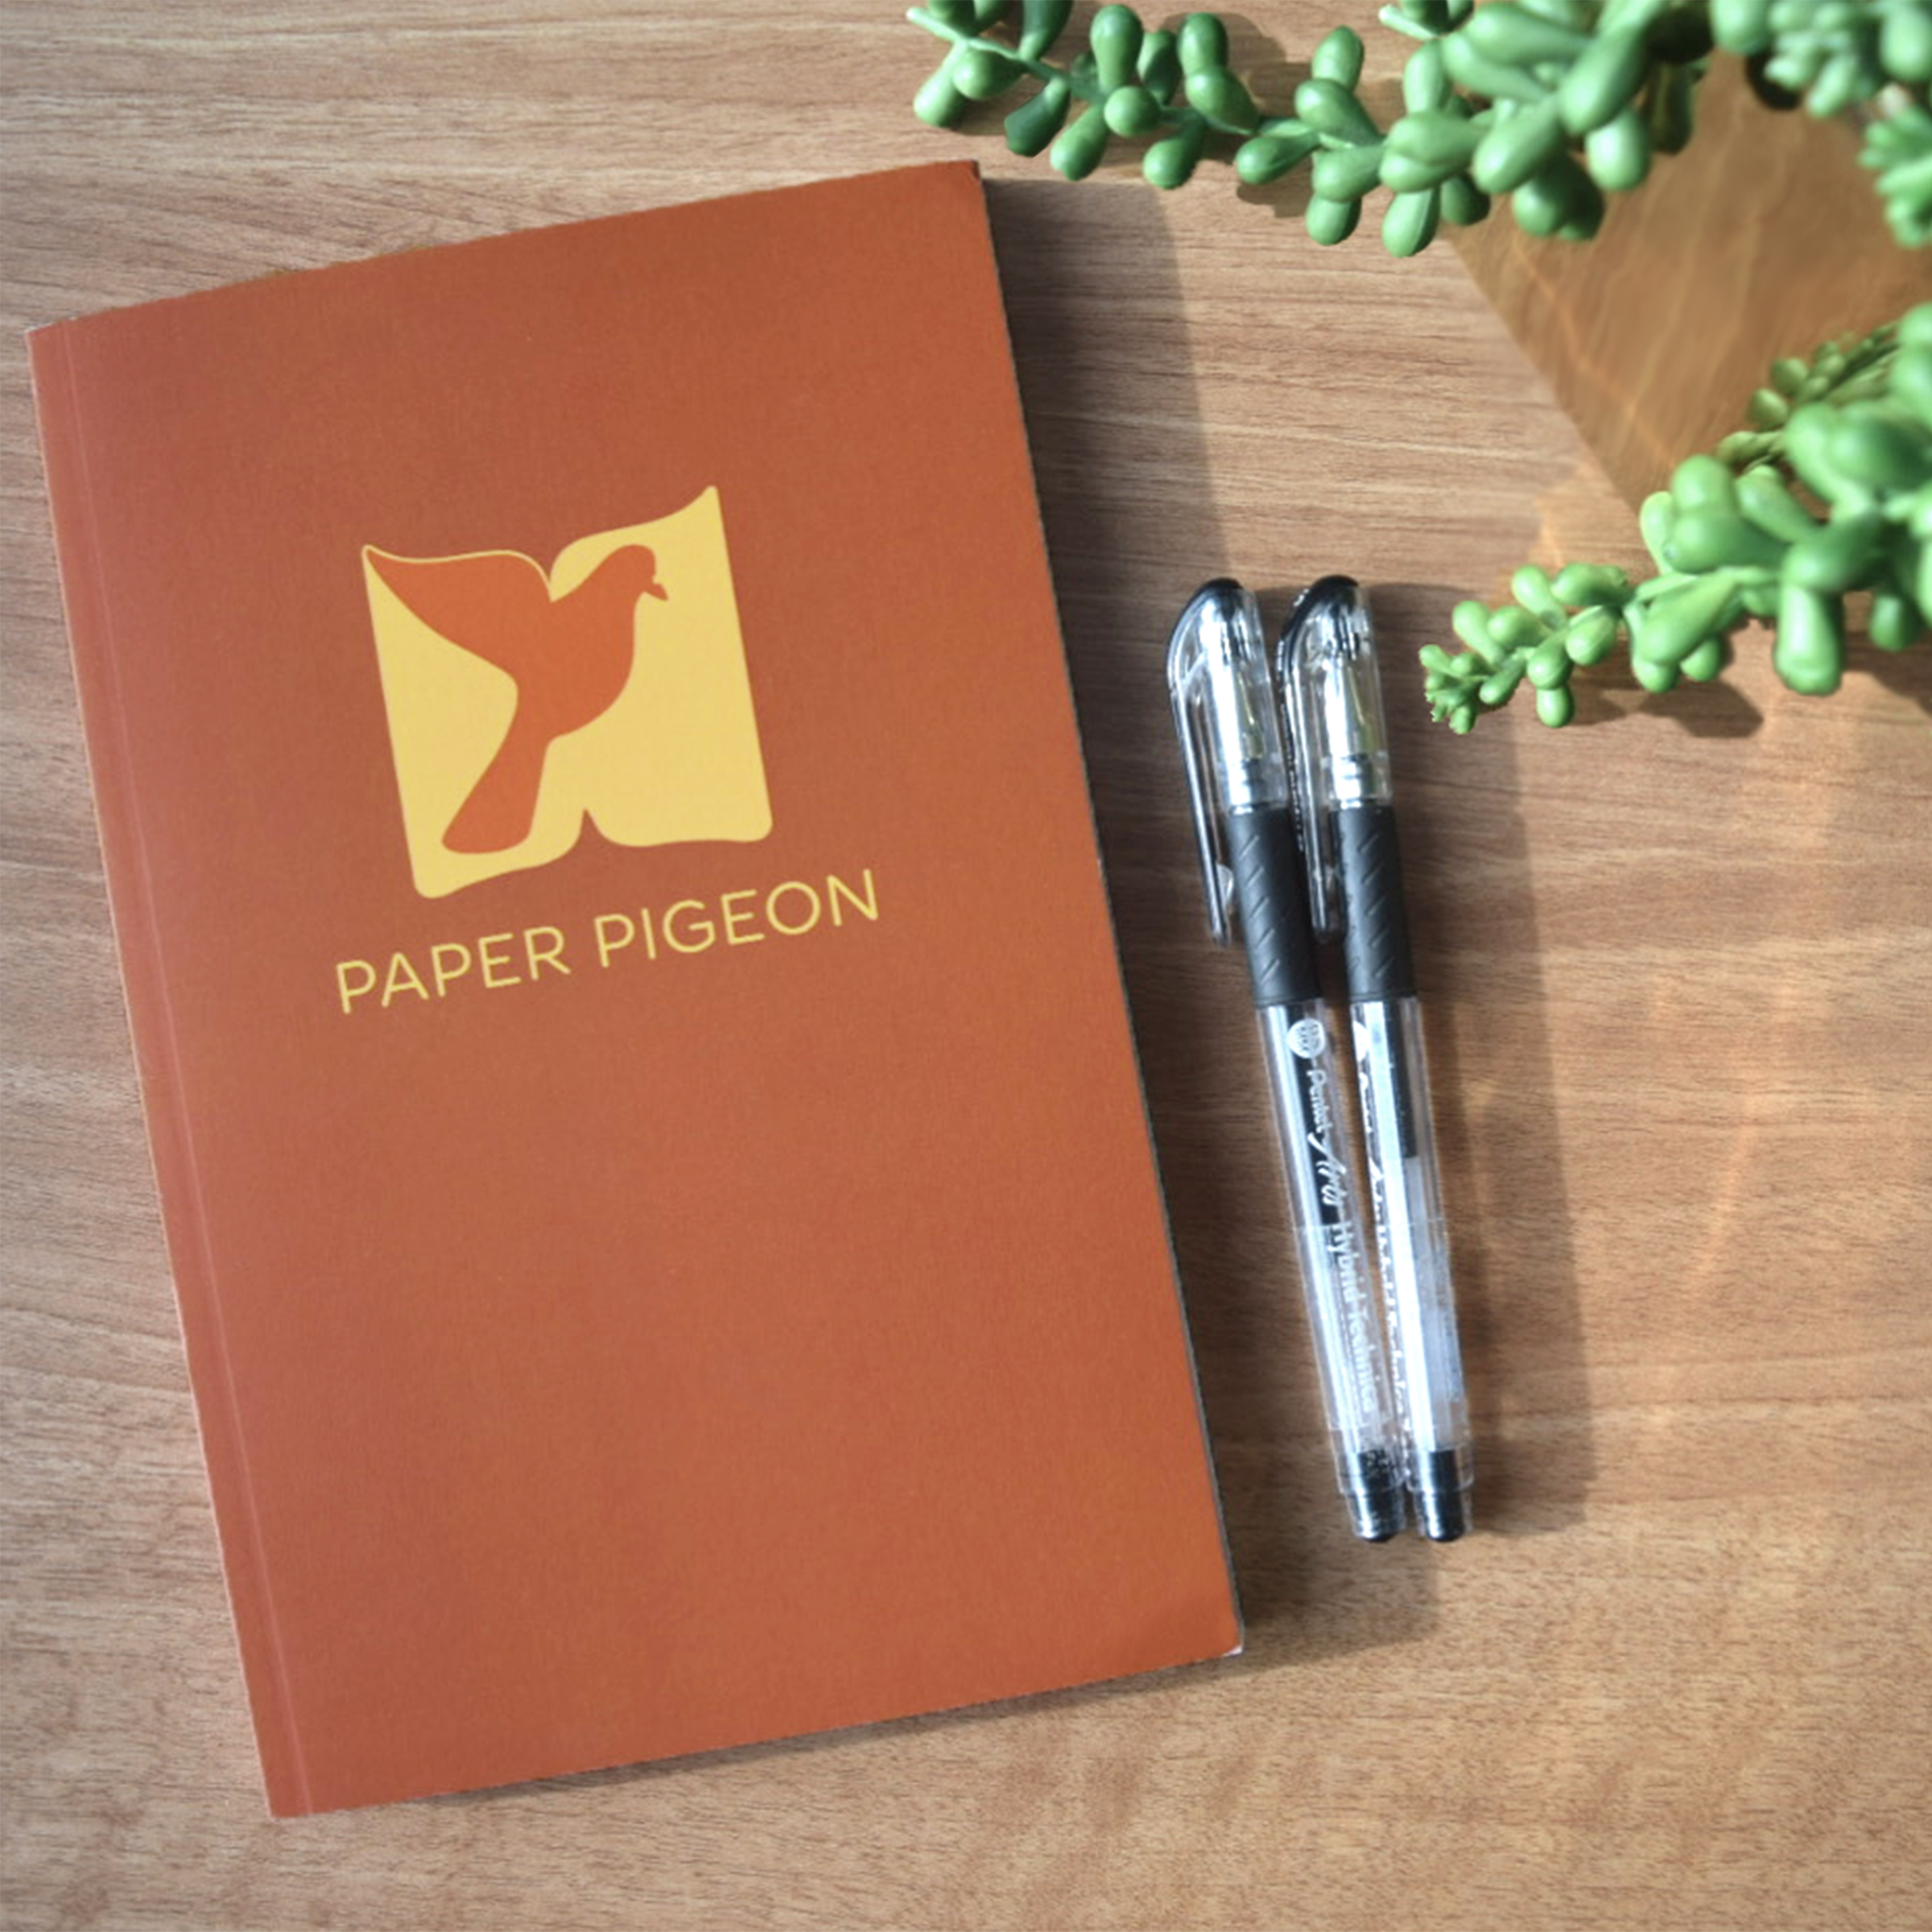 paper pigeon book and pens on the table Gorham Printing